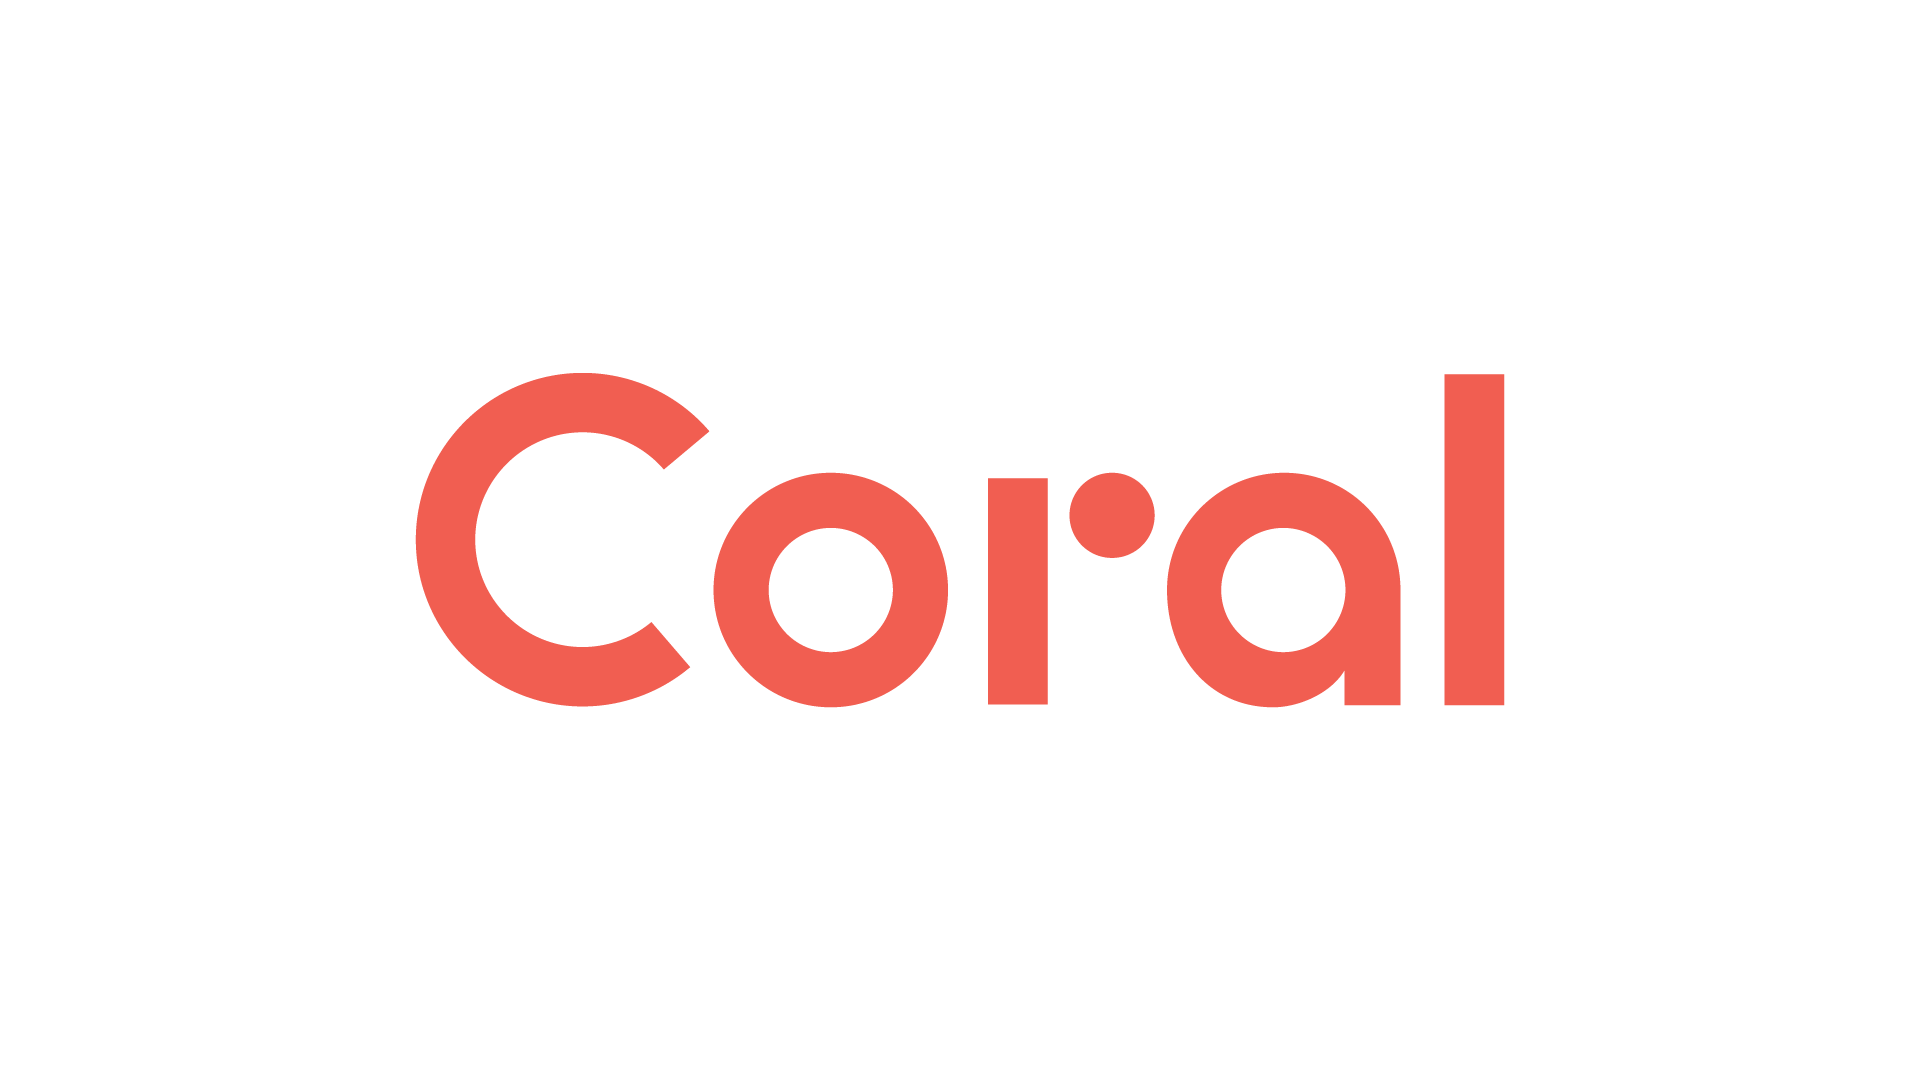 Google Coral | Edge AI and Deep Learning Services by Galliot